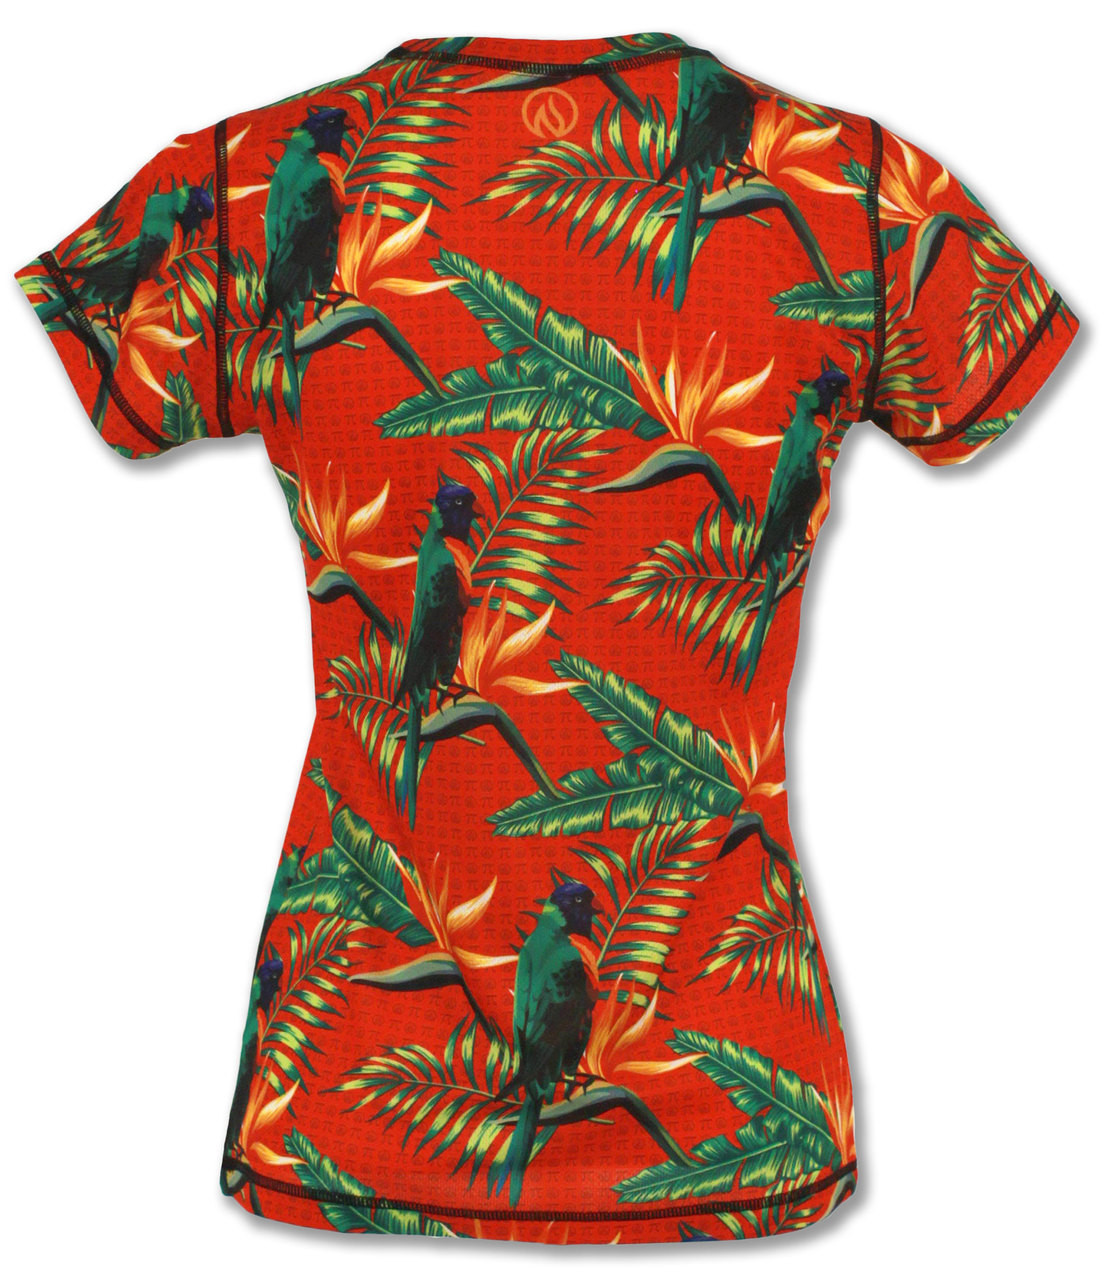 Women's Magnum Pi Tech Shirt for Running, Crossfit and Working Out